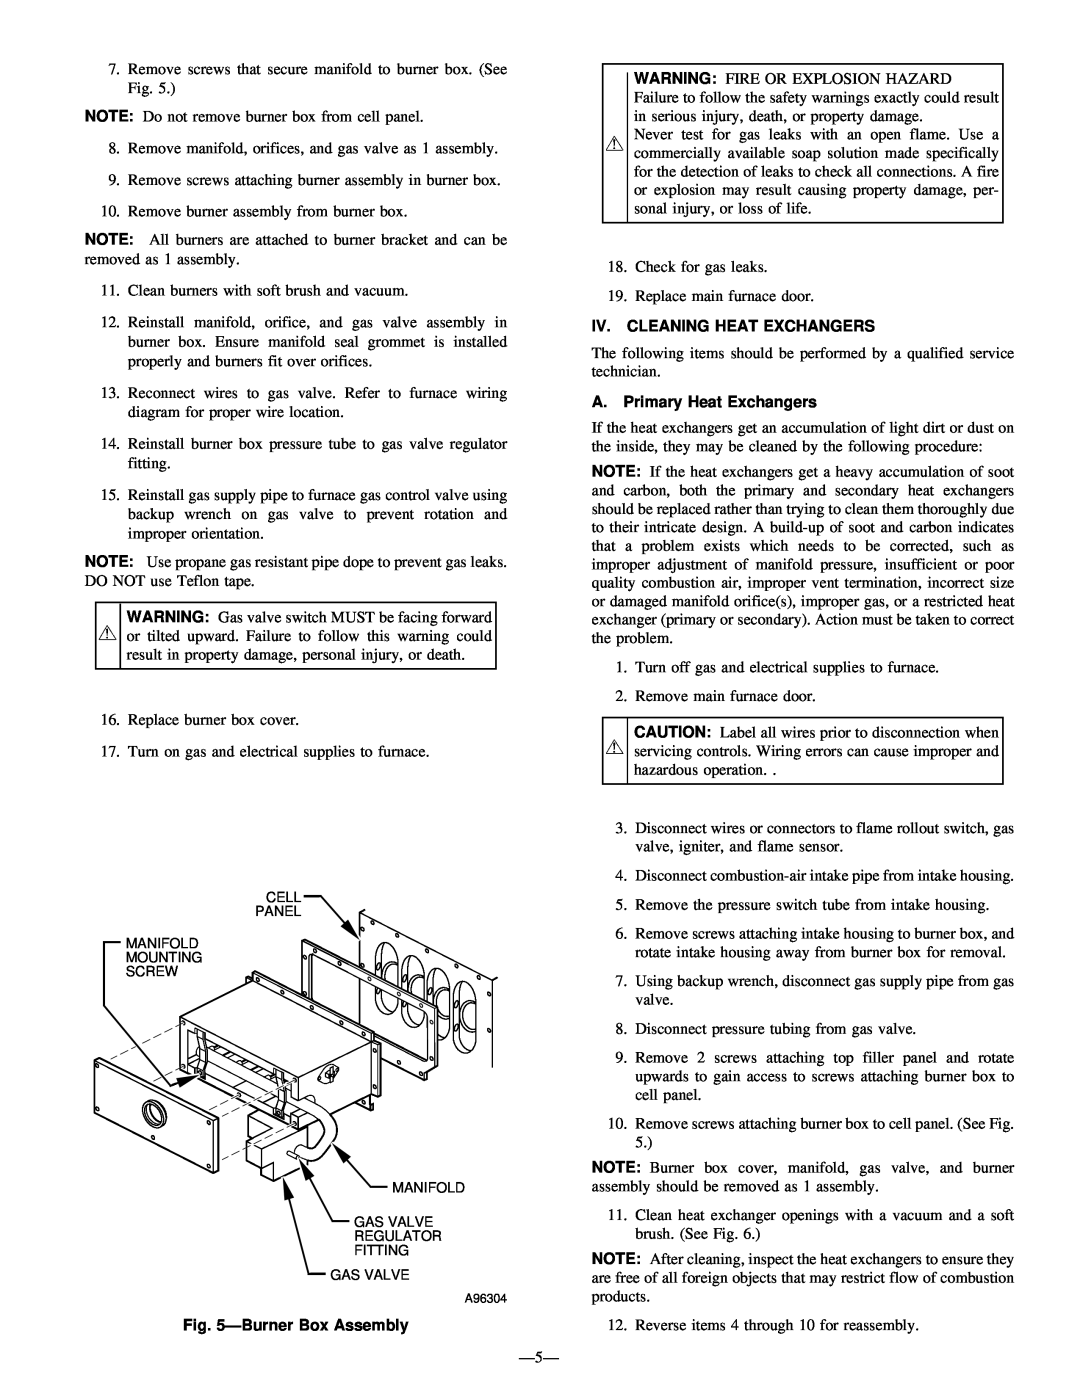 Bryant 350MAV user manual BurnerBox Assembly, Iv. Cleaning Heat Exchangers, A. Primary Heat Exchangers 